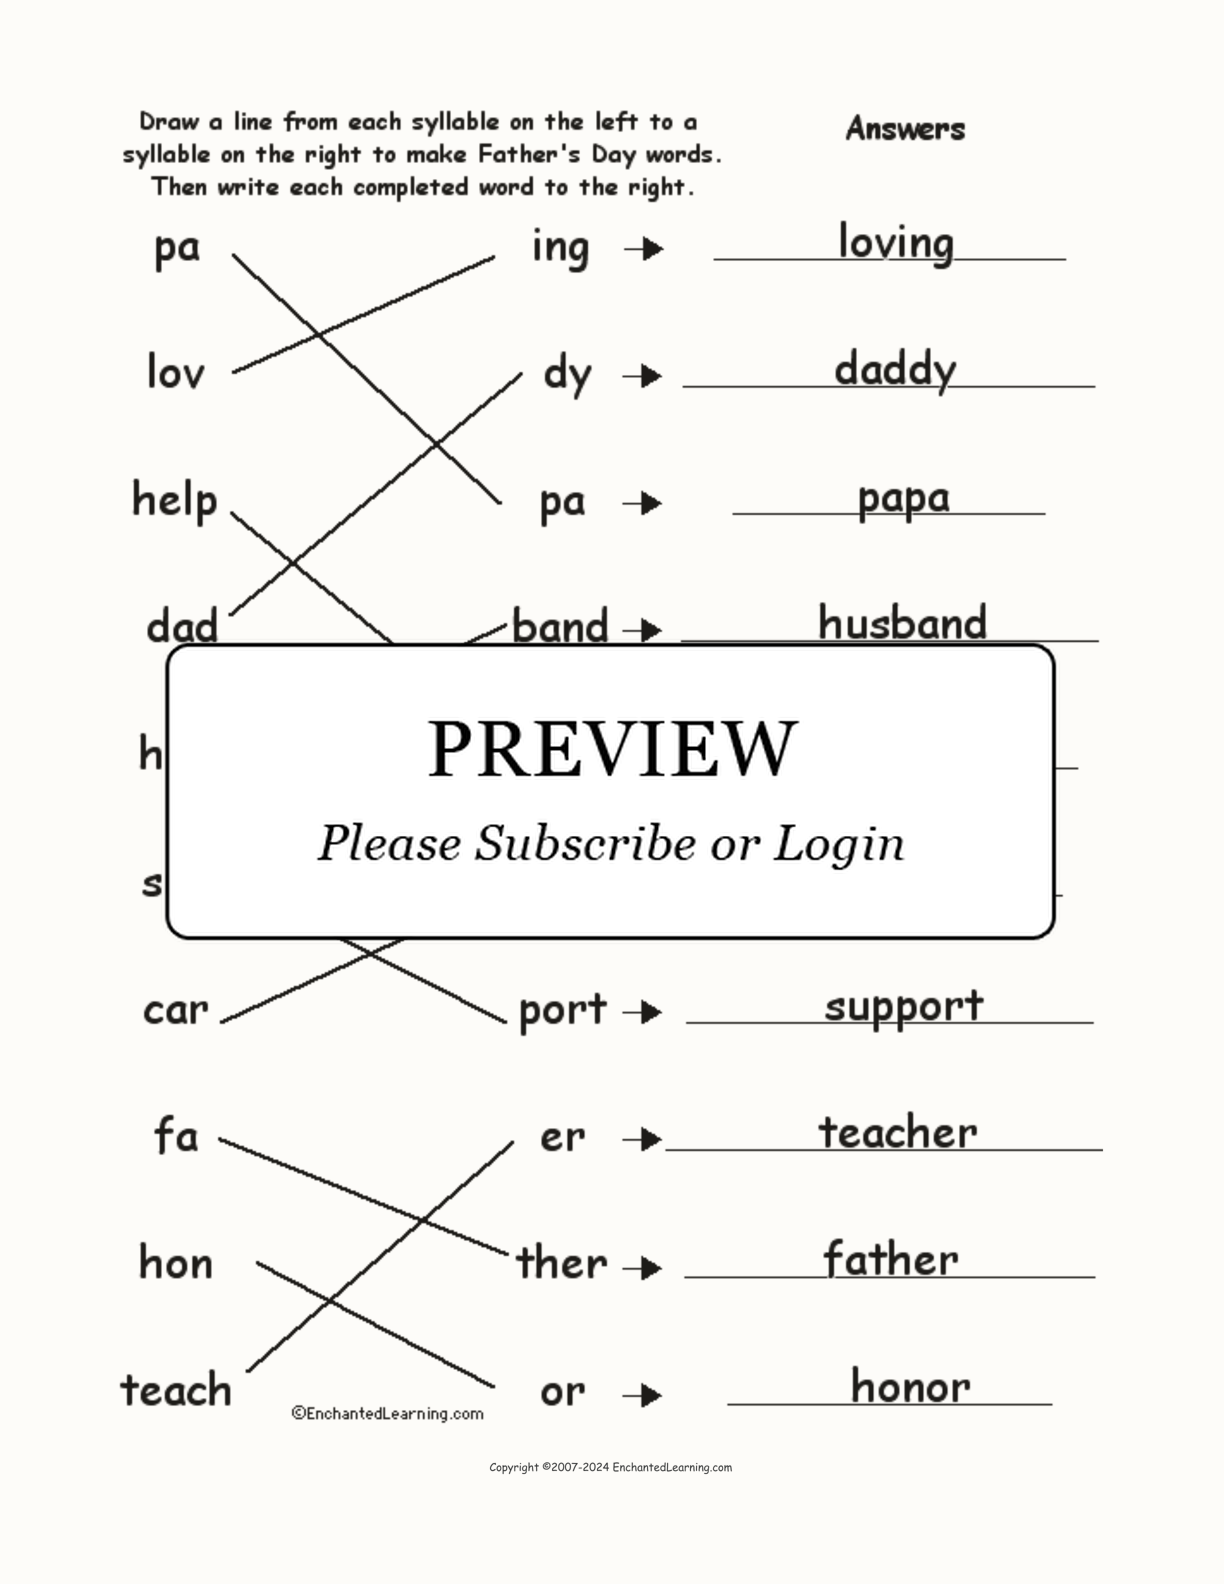 Match the Syllables: Father's Day Words interactive worksheet page 2